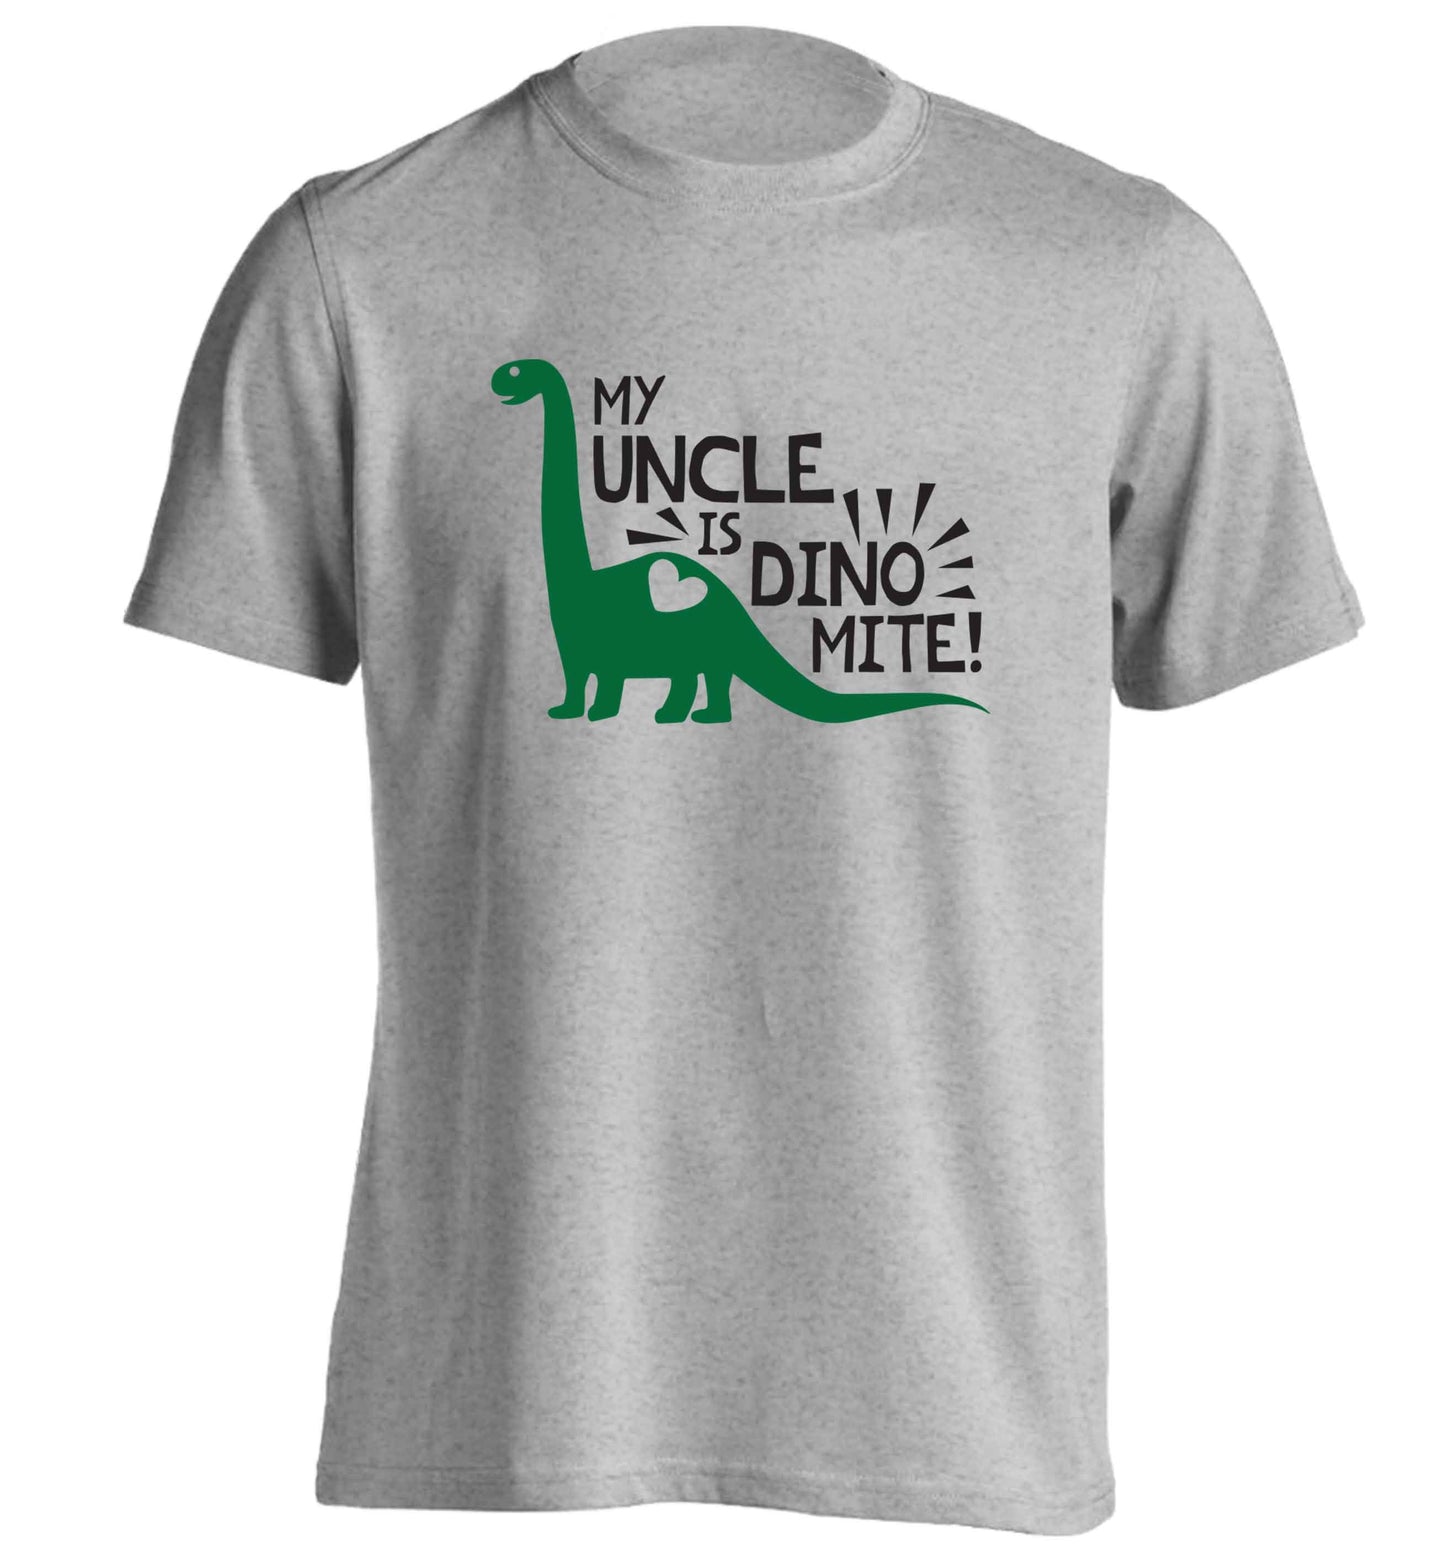 My uncle is dinomite! adults unisex grey Tshirt 2XL